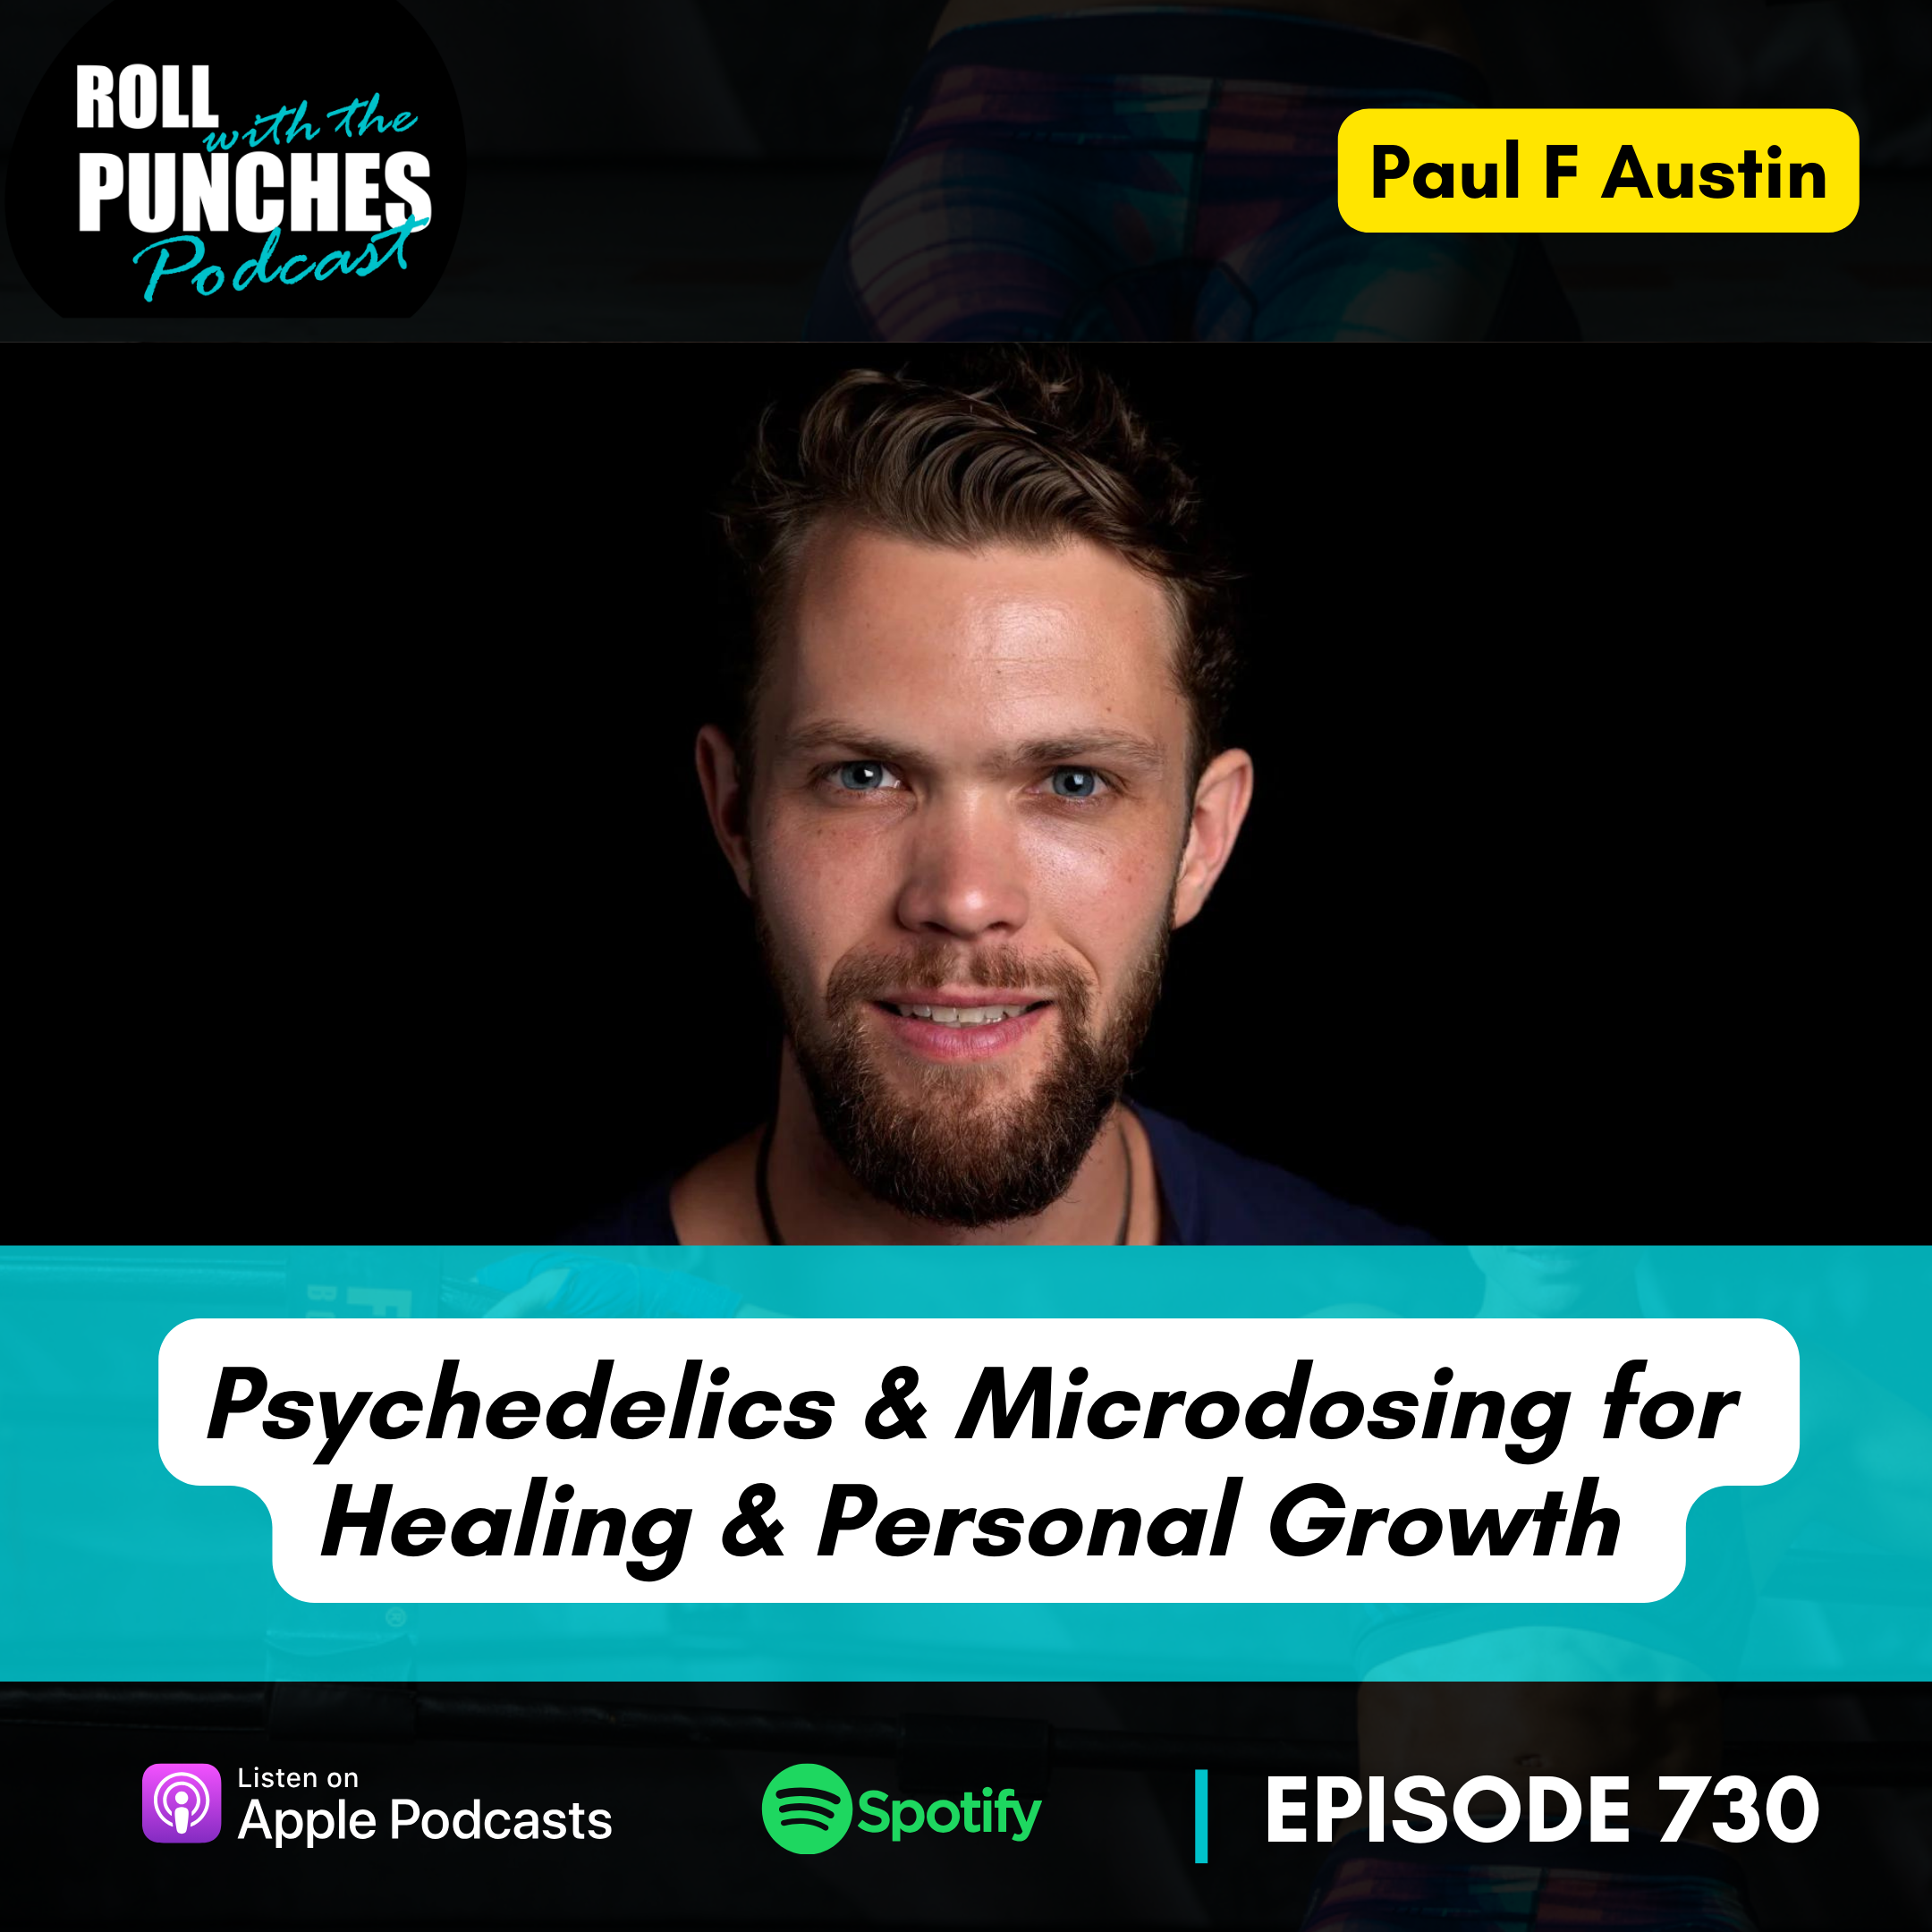 Psychedelics & Microdosing for Healing & Personal Growth | Paul Austin - 730